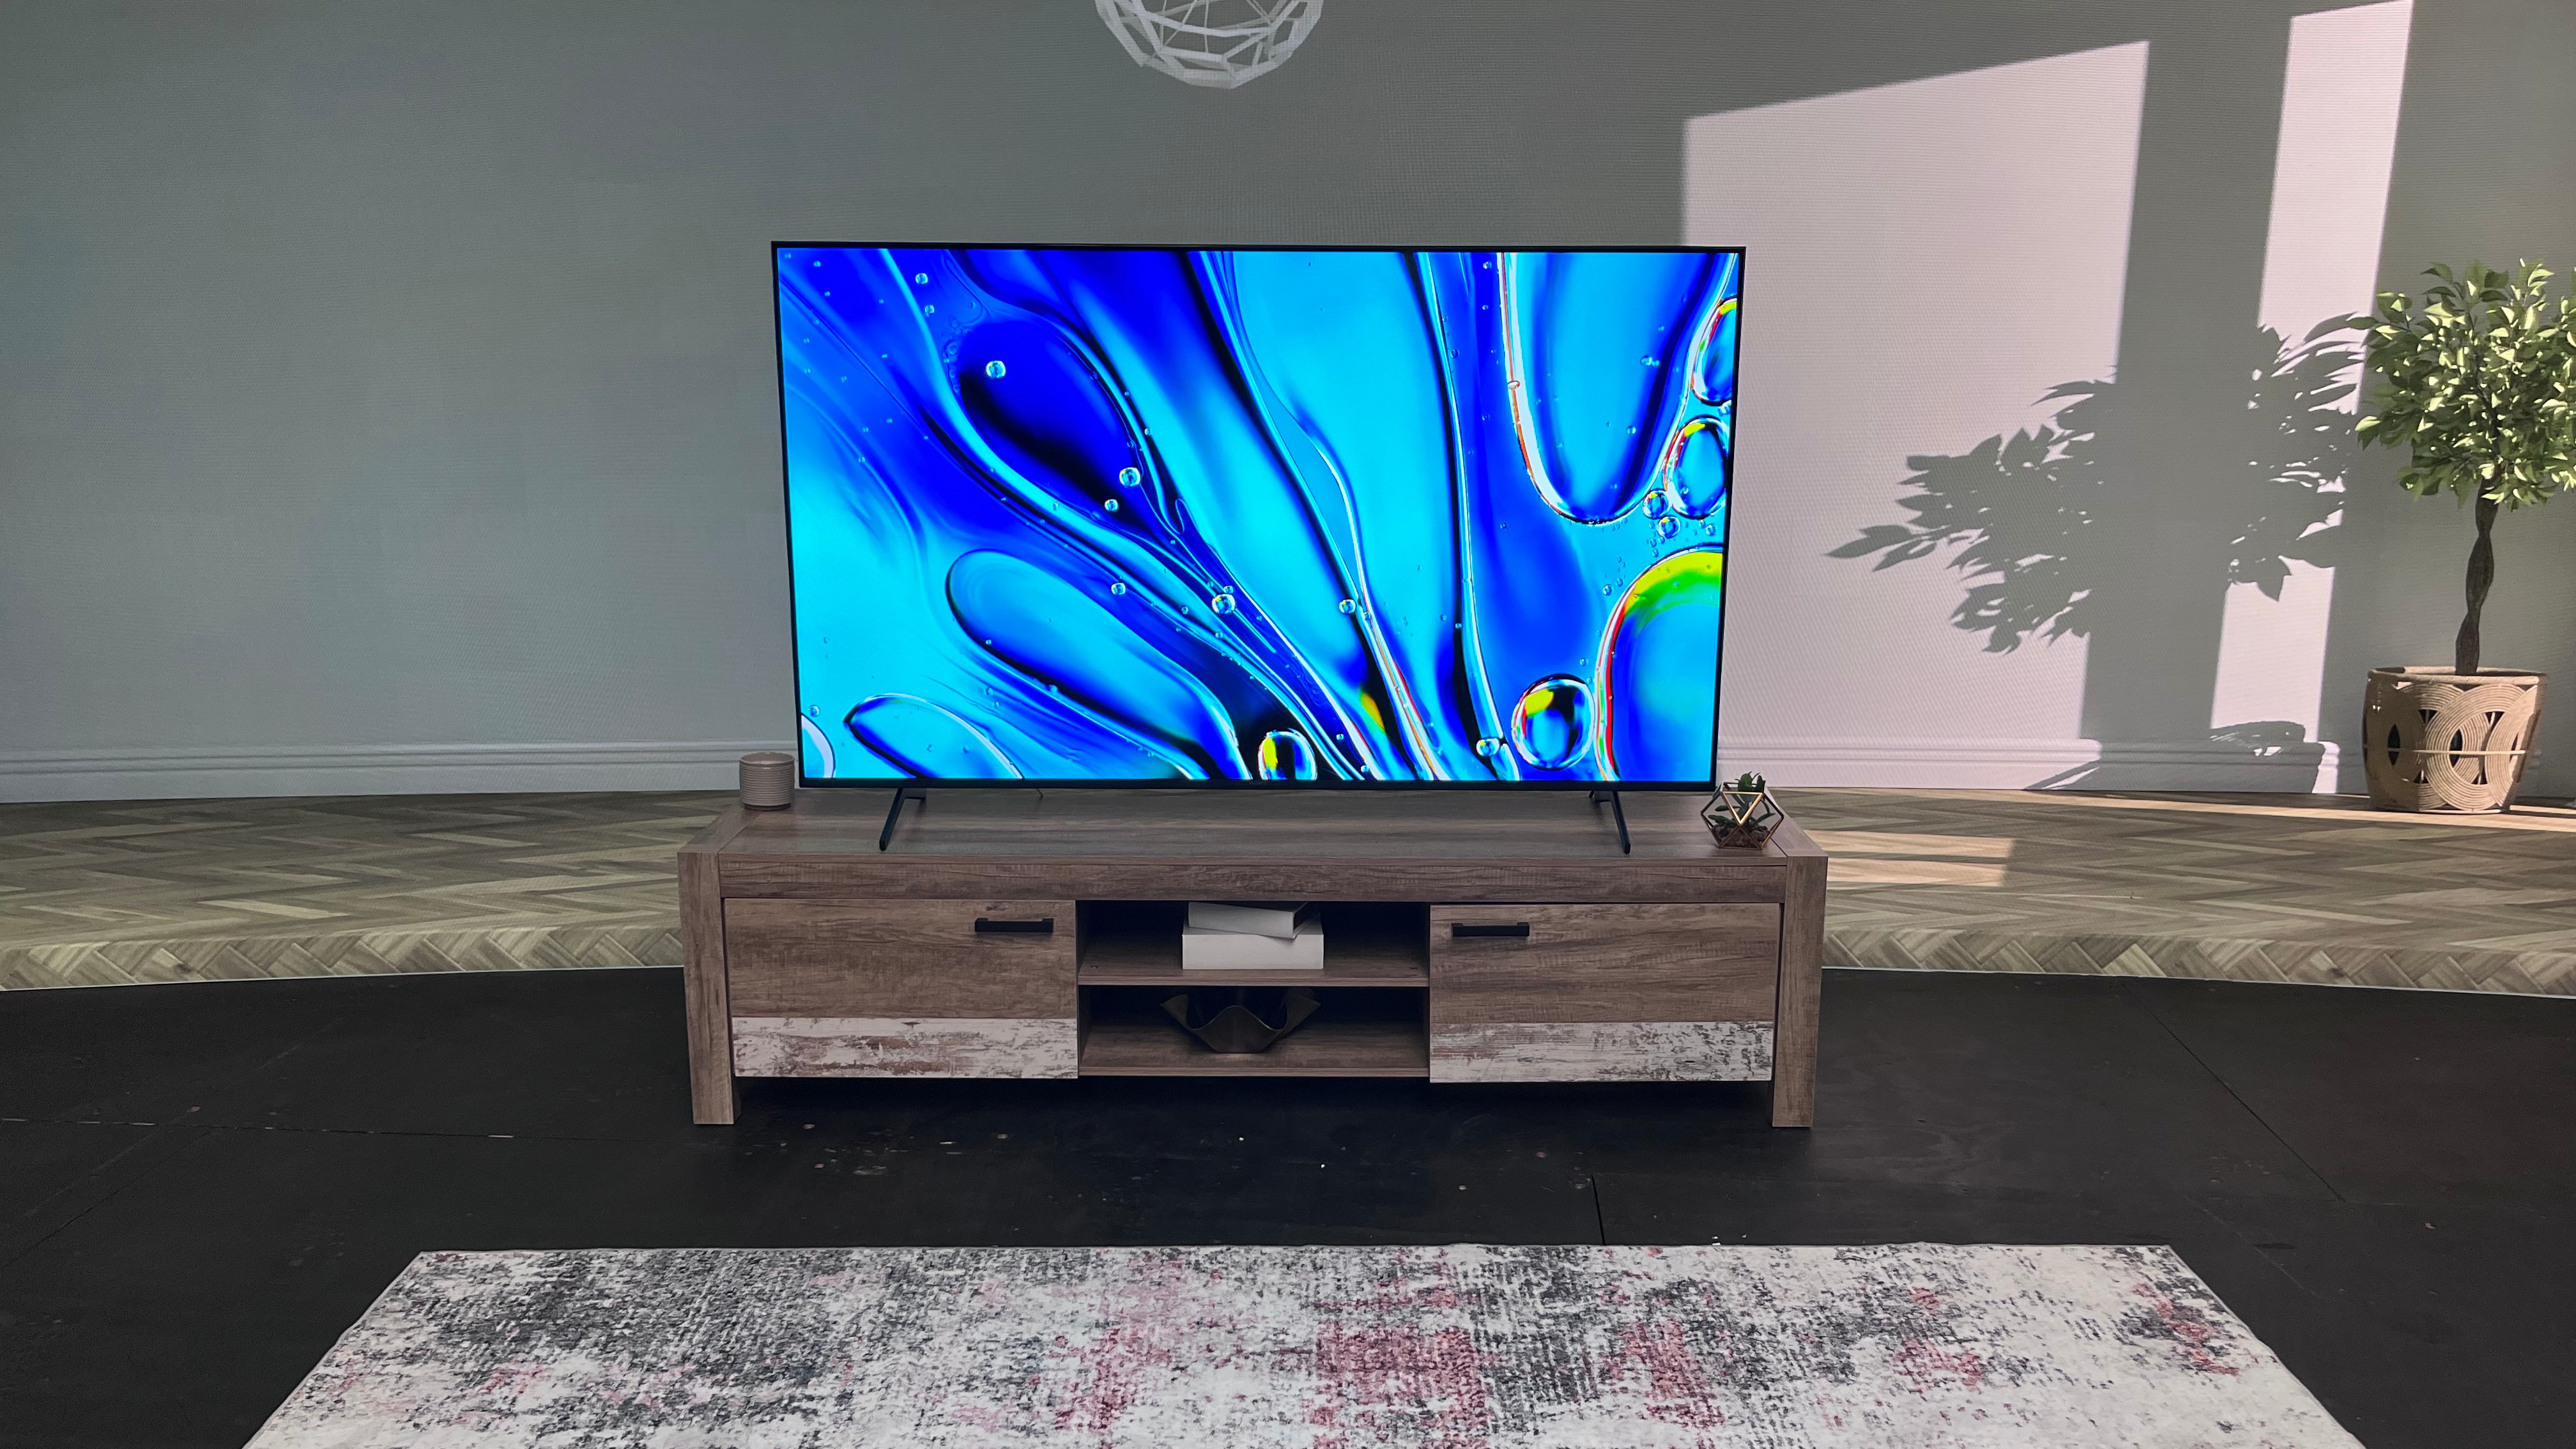 Sony Bravia 3 LED TV on wooden Tv stand